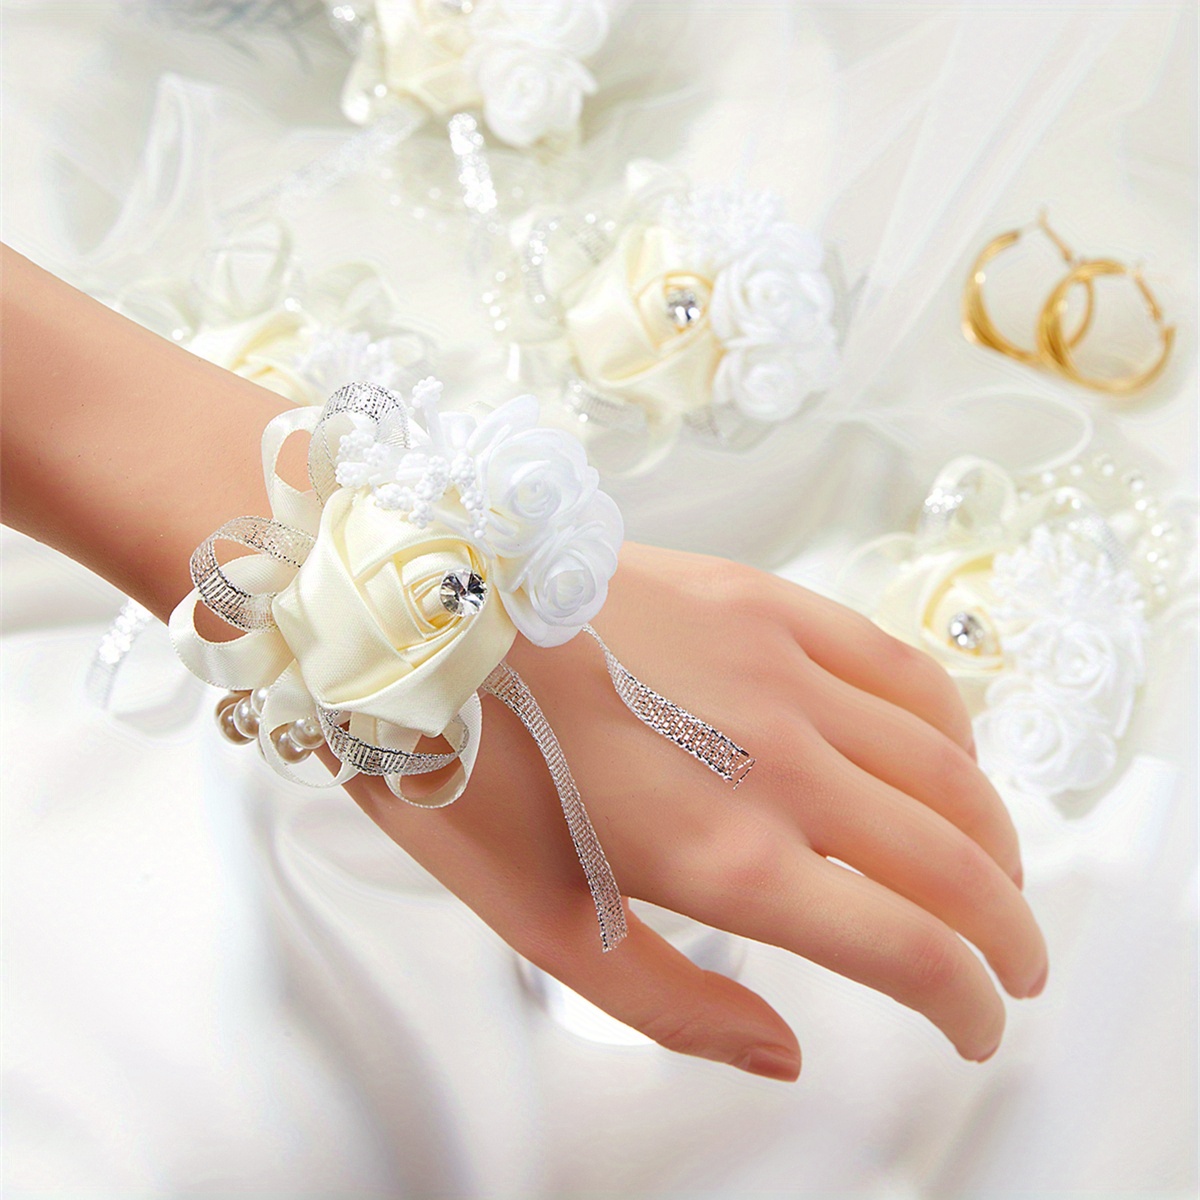 2pcs wrist corsages for bride bridesmaids wedding artificial silk rose faux pearls wrist corsage for women wedding bridal shower bride and groom s mother prom formal dinner party homecoming ceremony anniversary wrist flower decor